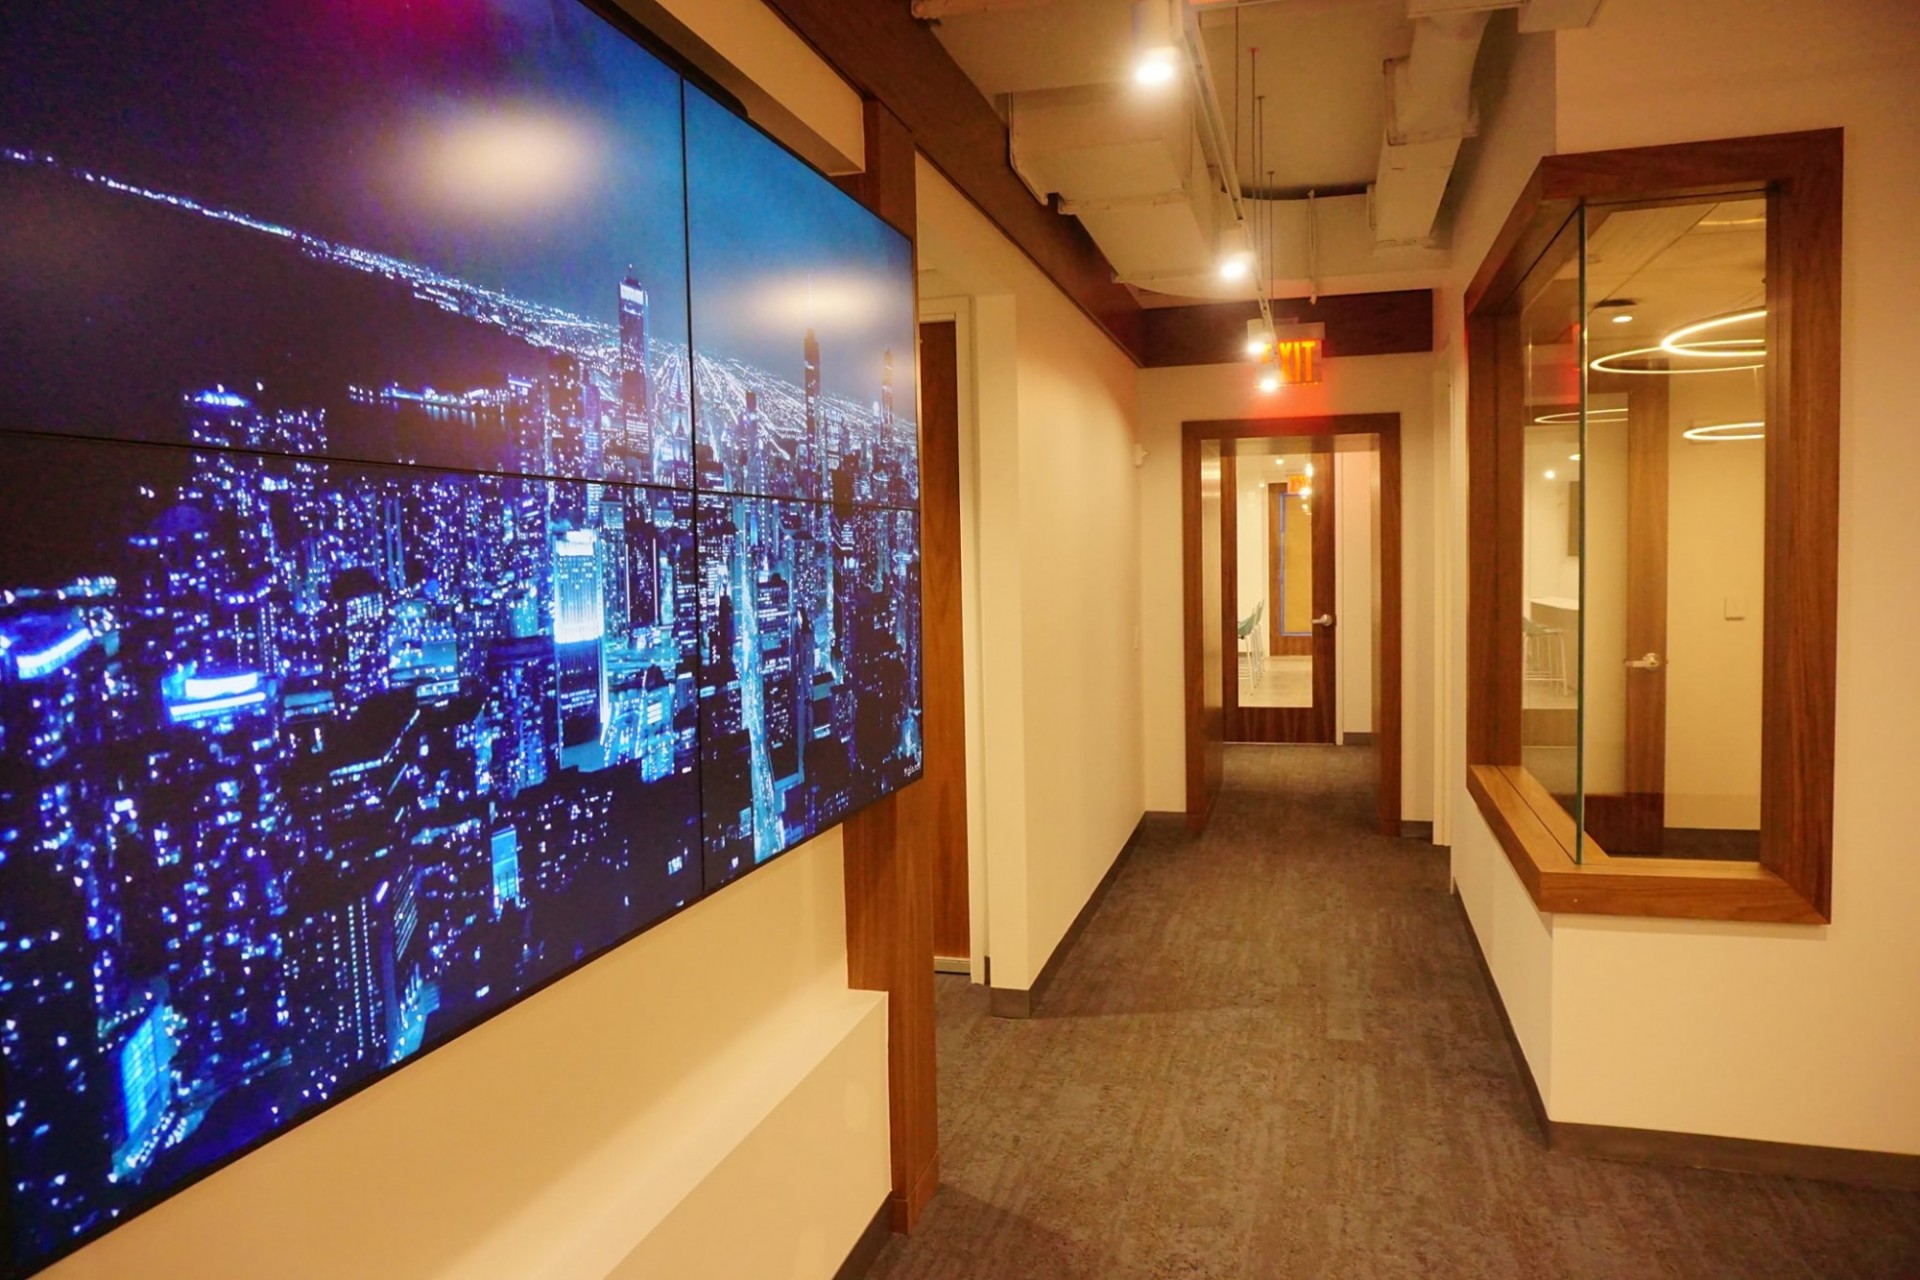 A brown-carpeted hallway with a glass door at the end of it. On the left wall, there is a video screen displaying a city skyline at night.